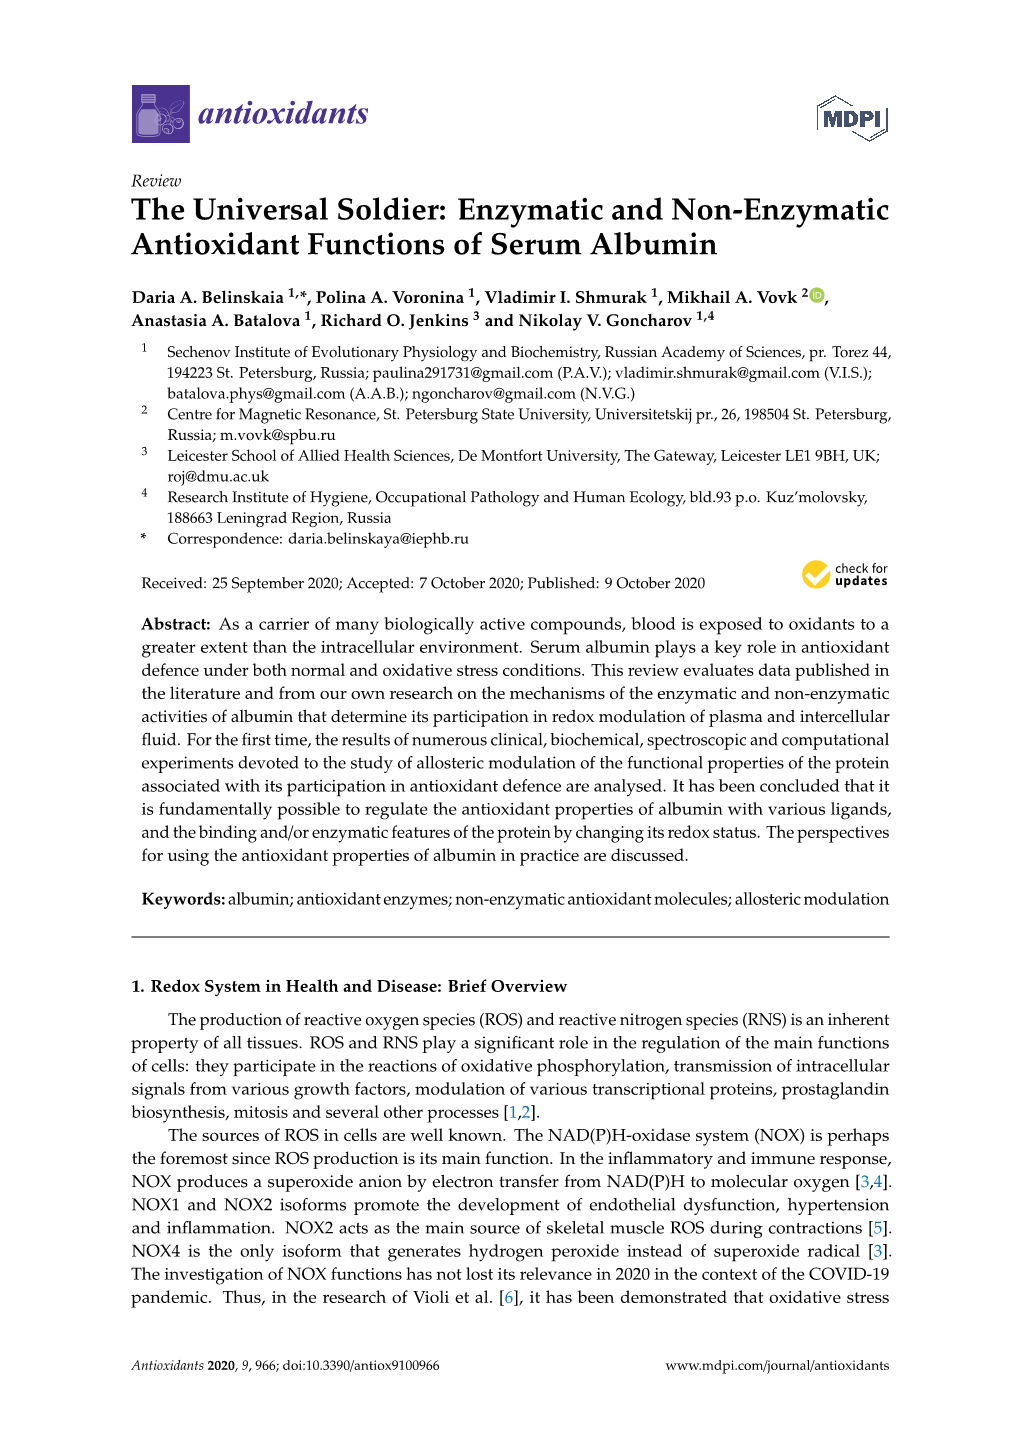 Enzymatic and Non-Enzymatic Antioxidant Functions of Serum Albumin